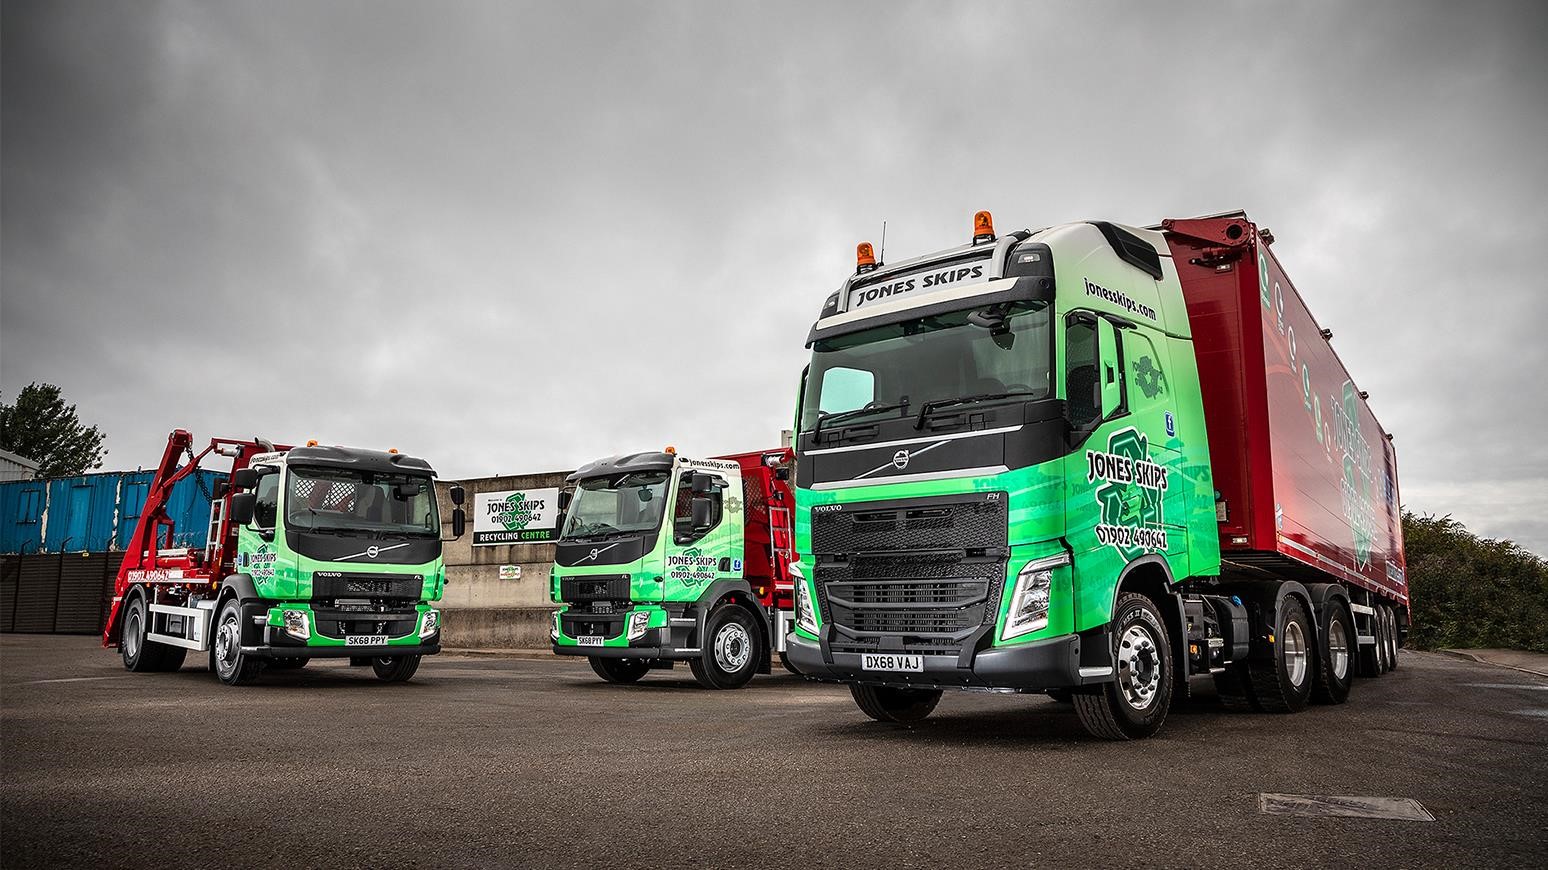 Volvo FH & FL Trucks Are Ready To Go To Work For Jones Skips